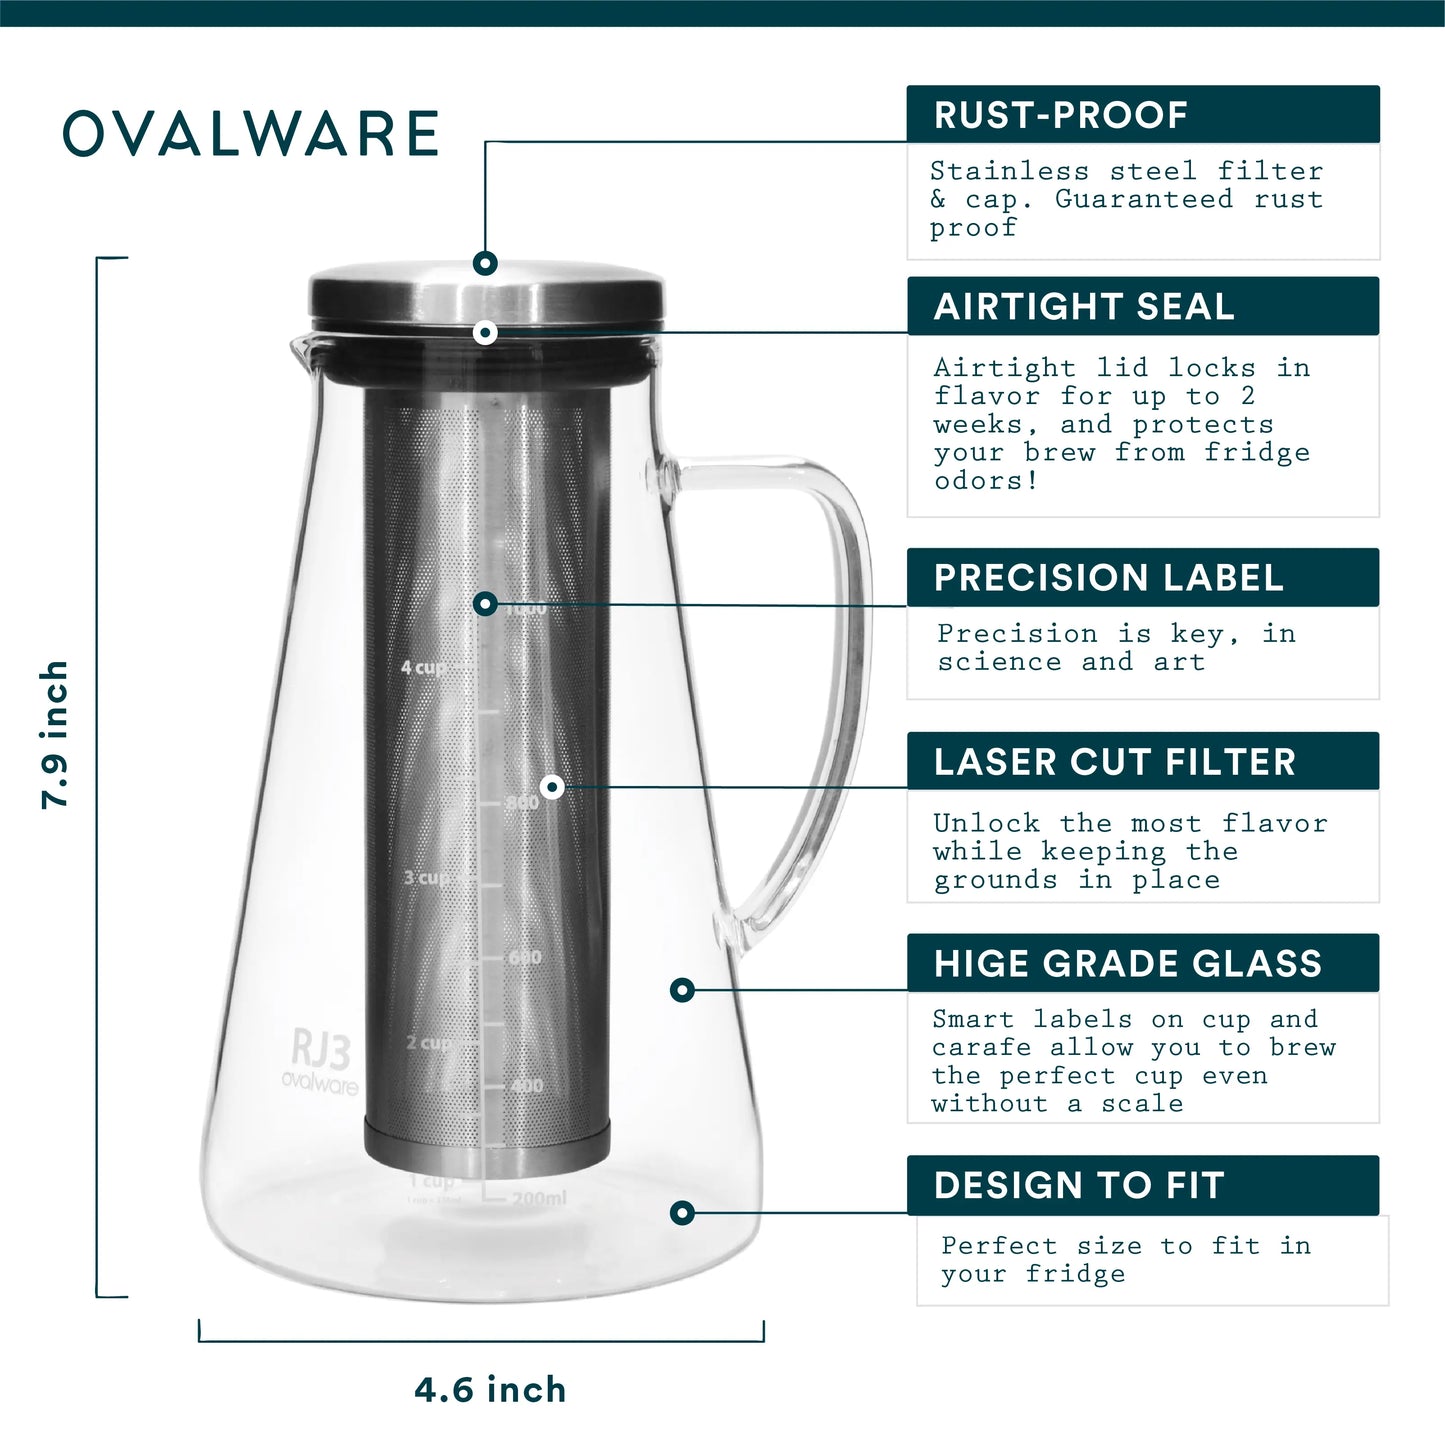 Ovalware Cold Brew Maker Quality - Coffee shop franchise standards in your home, offered by White Horse Coffee Roasters.